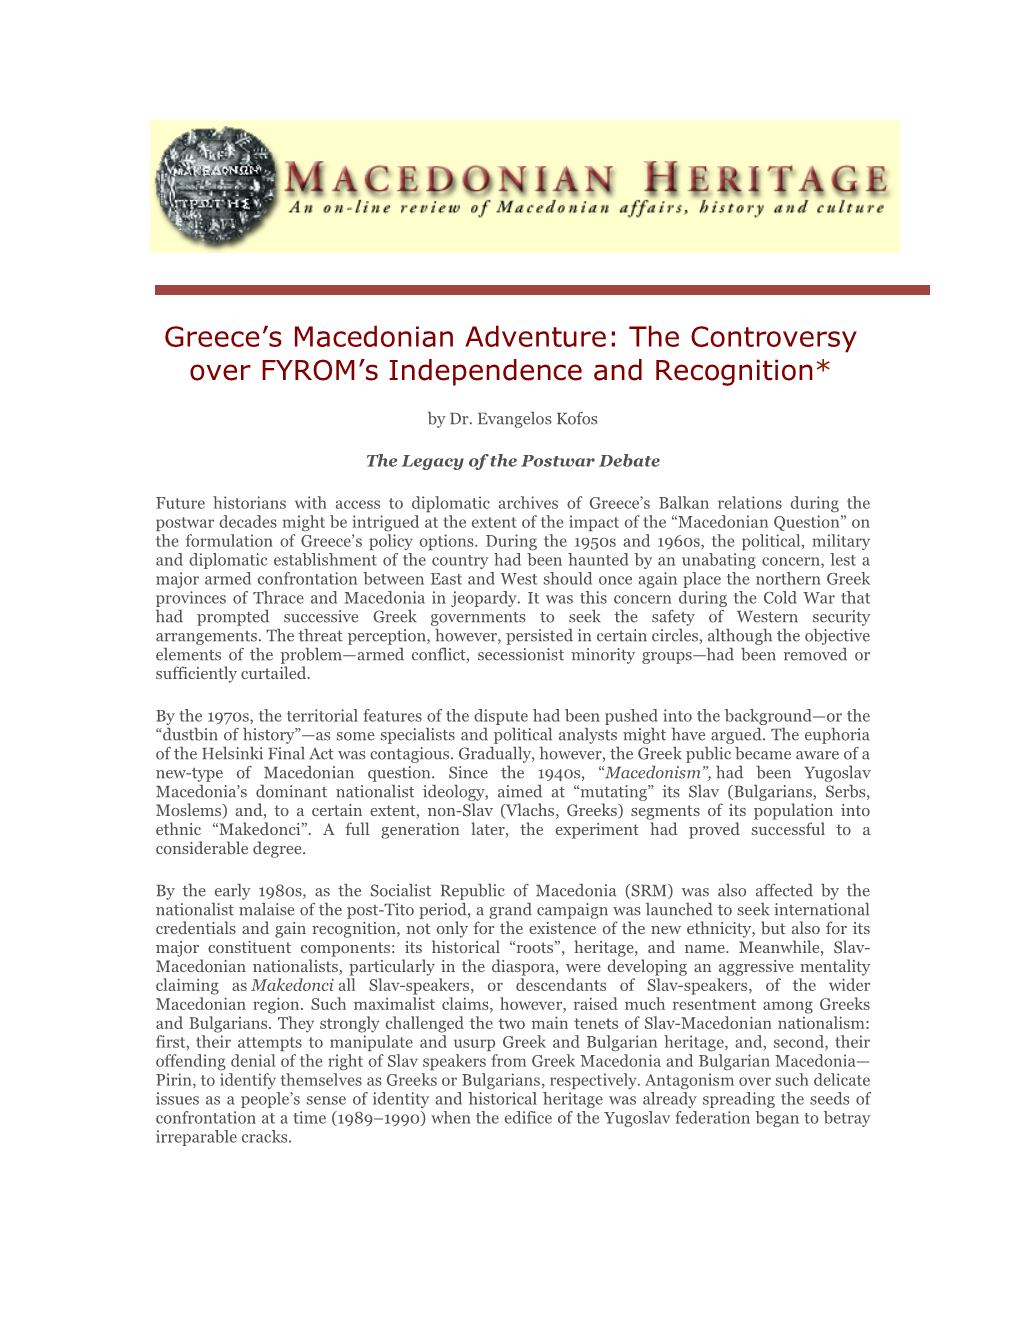 Greece's Macedonian Adventure: the Controversy Over